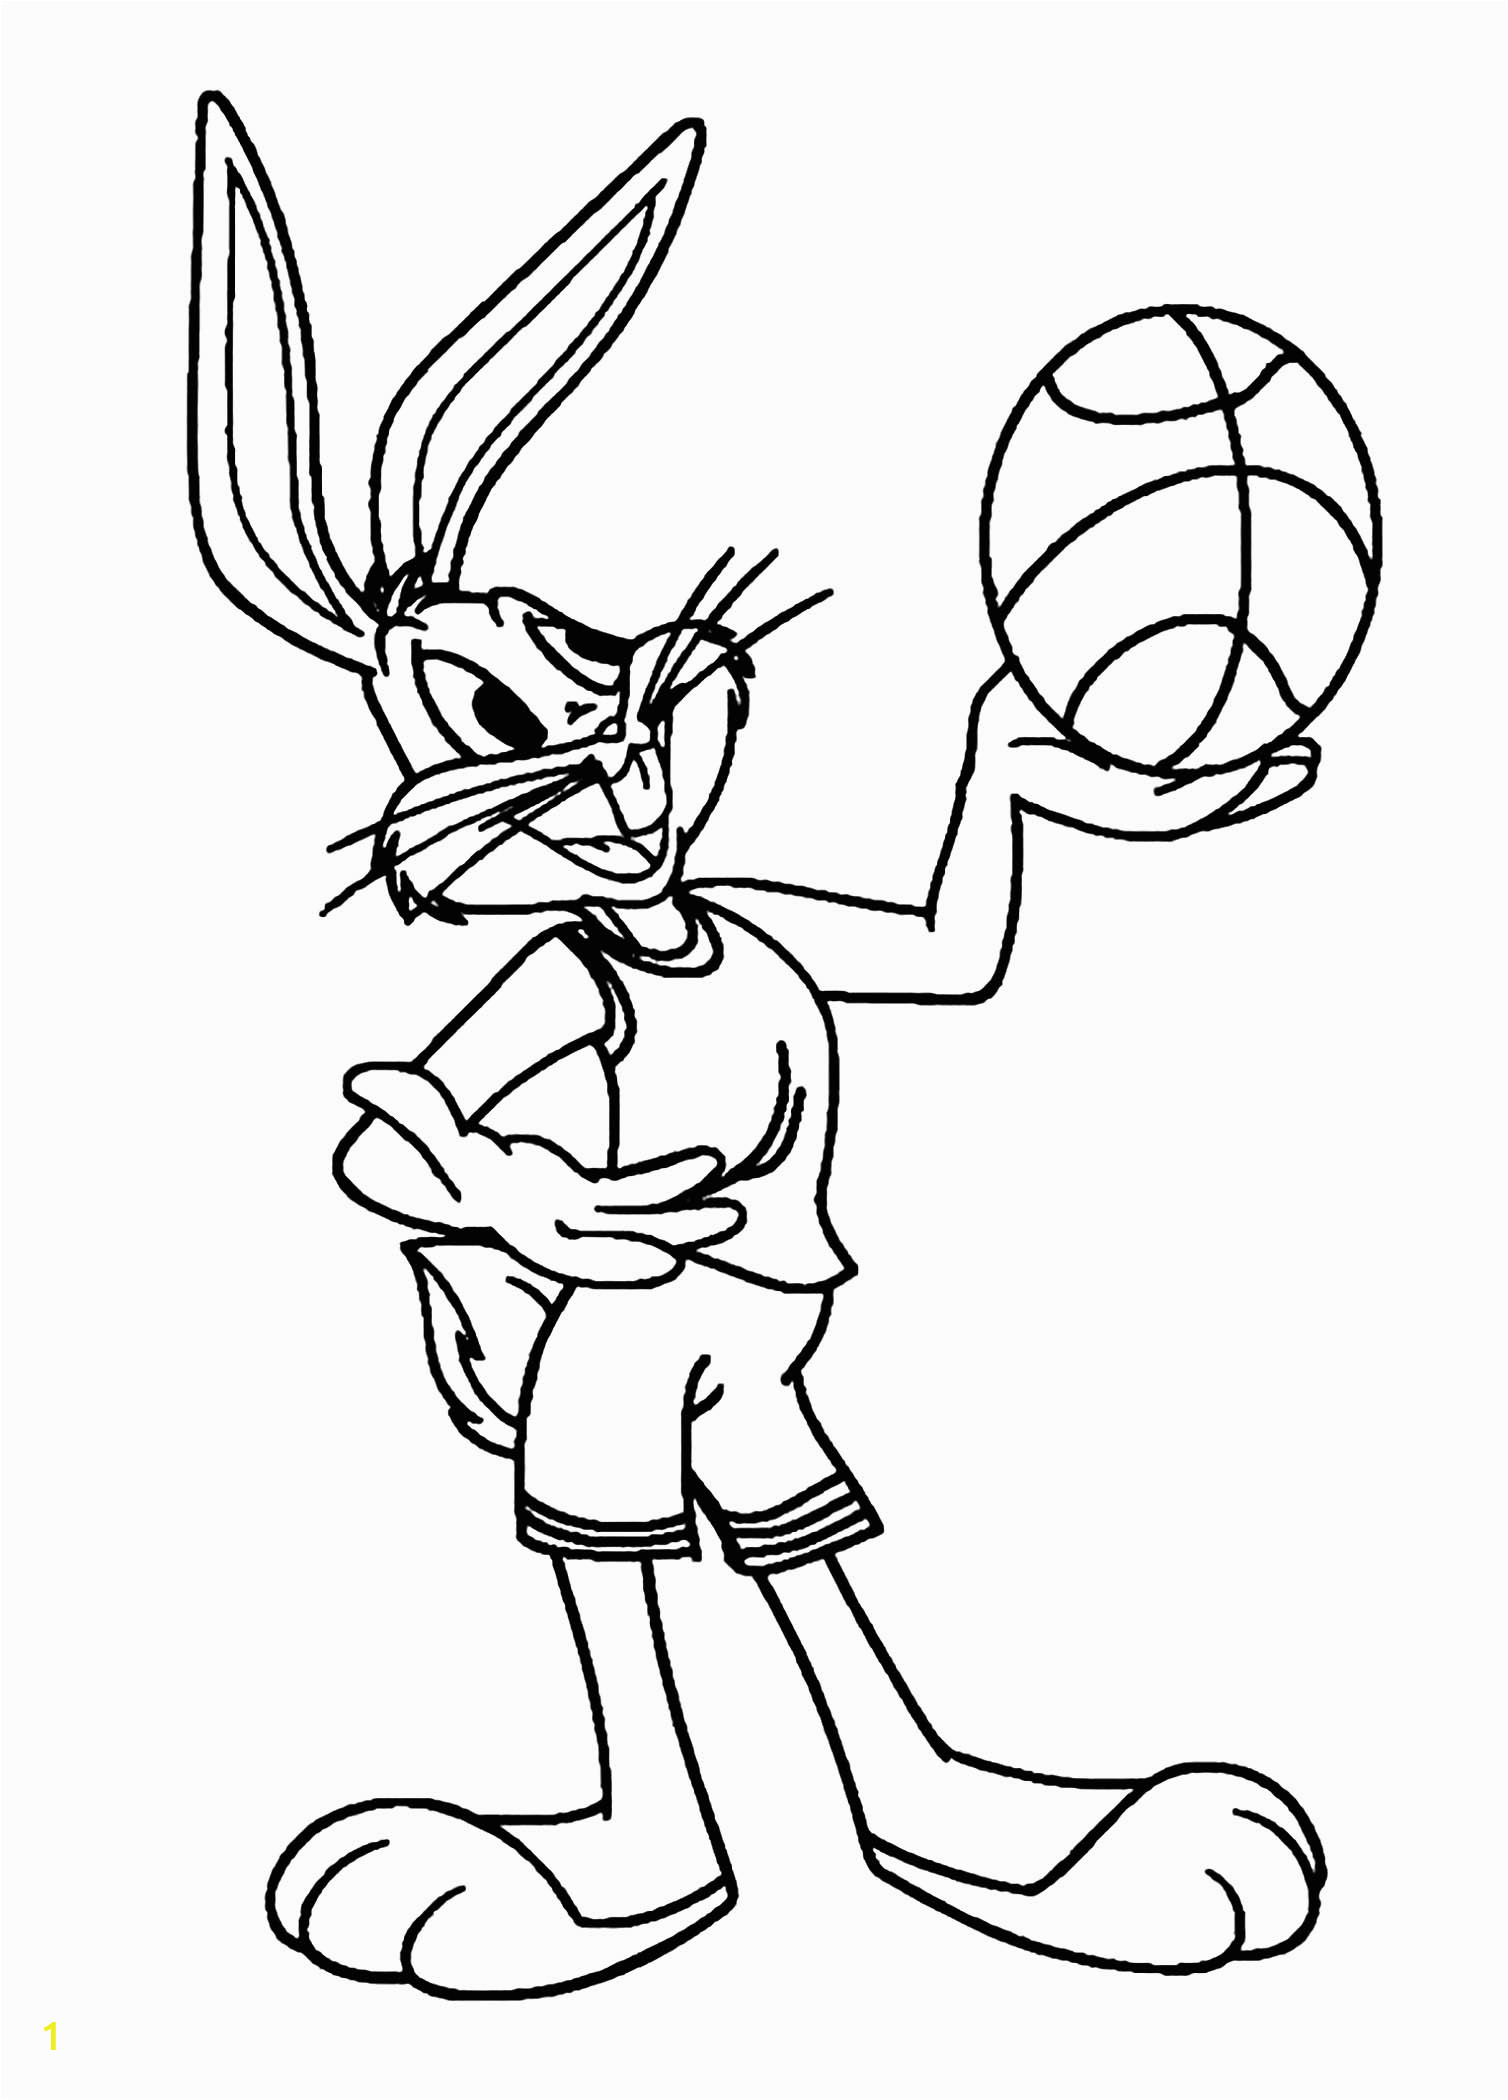 image=basketball coloring pages for children basketball 8548 1